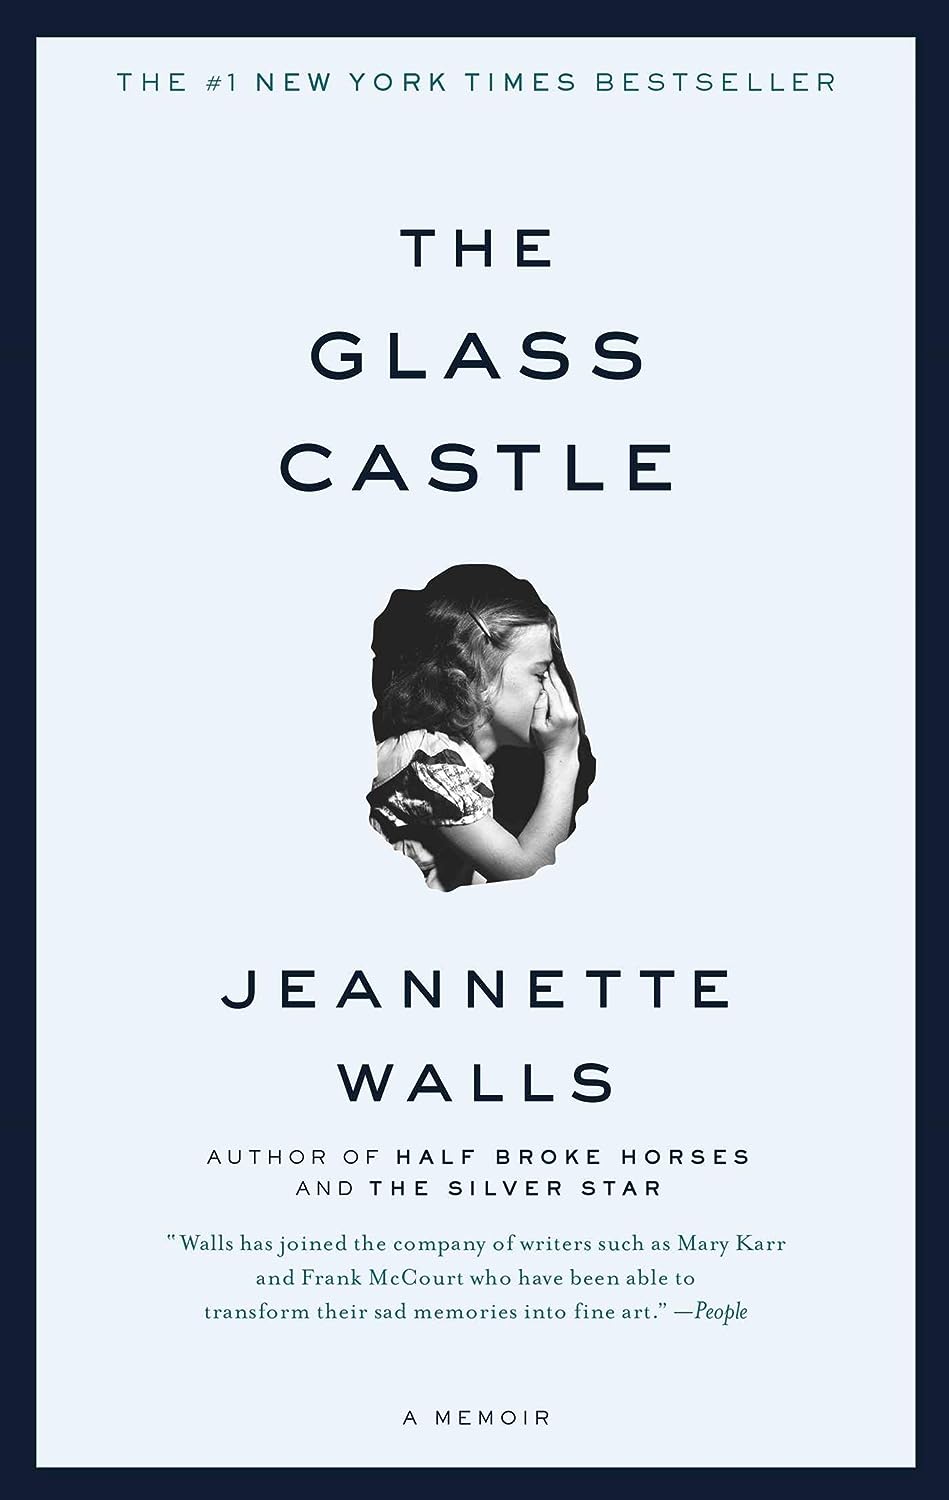 The Many Lives of Jeannette Walls - The New York Times